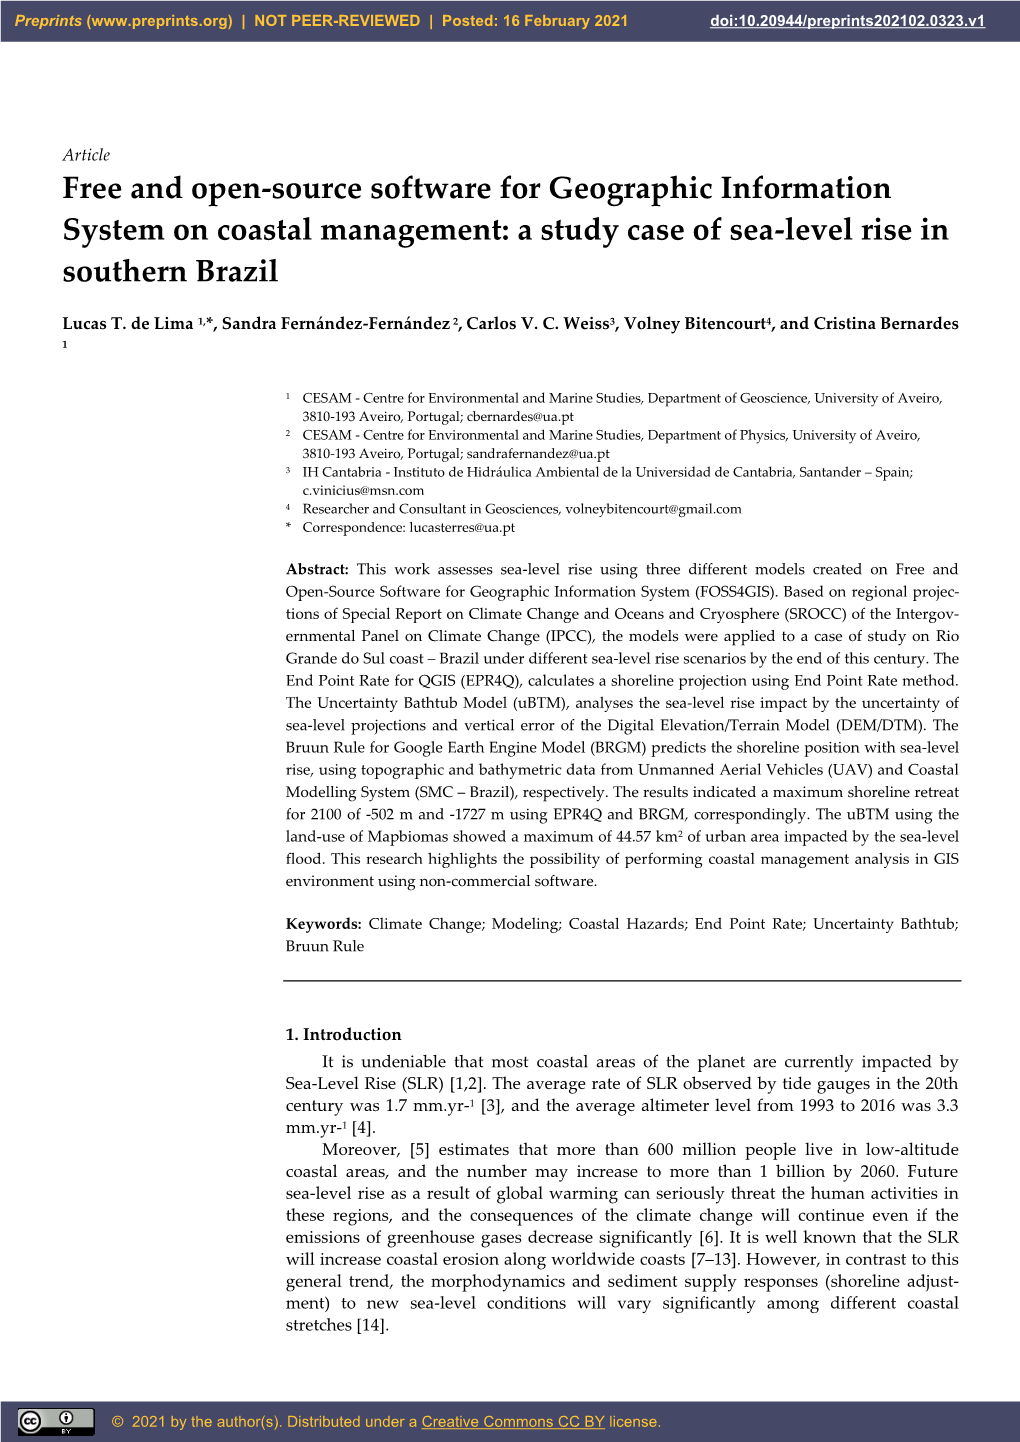 A Study Case of Sea-Level Rise in Southern Brazil